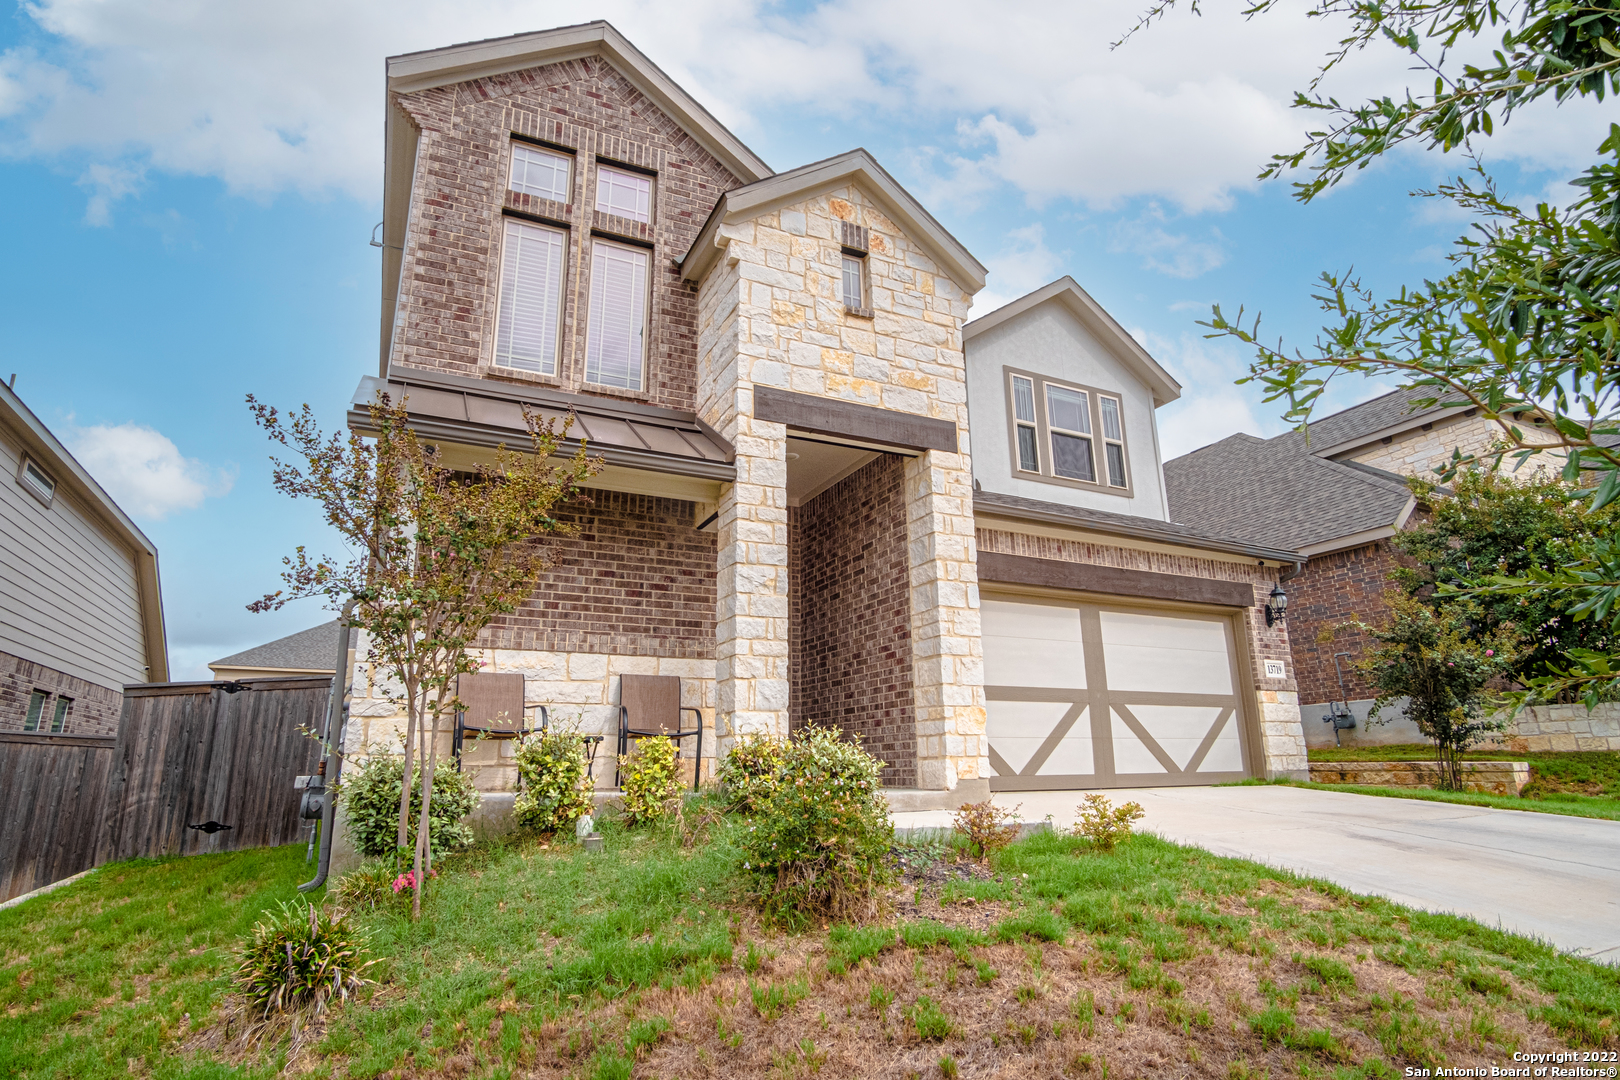 Gehan 2 story home located in Arcadia Ridge off of 1604/ Potranco. This is a 4 bedroom, 3 bath, home that included a media room, office/study. Home includes an extended patio and buffet bar. Perfect home for entertaining with over 3,000 sqft. Schedule your tour today.